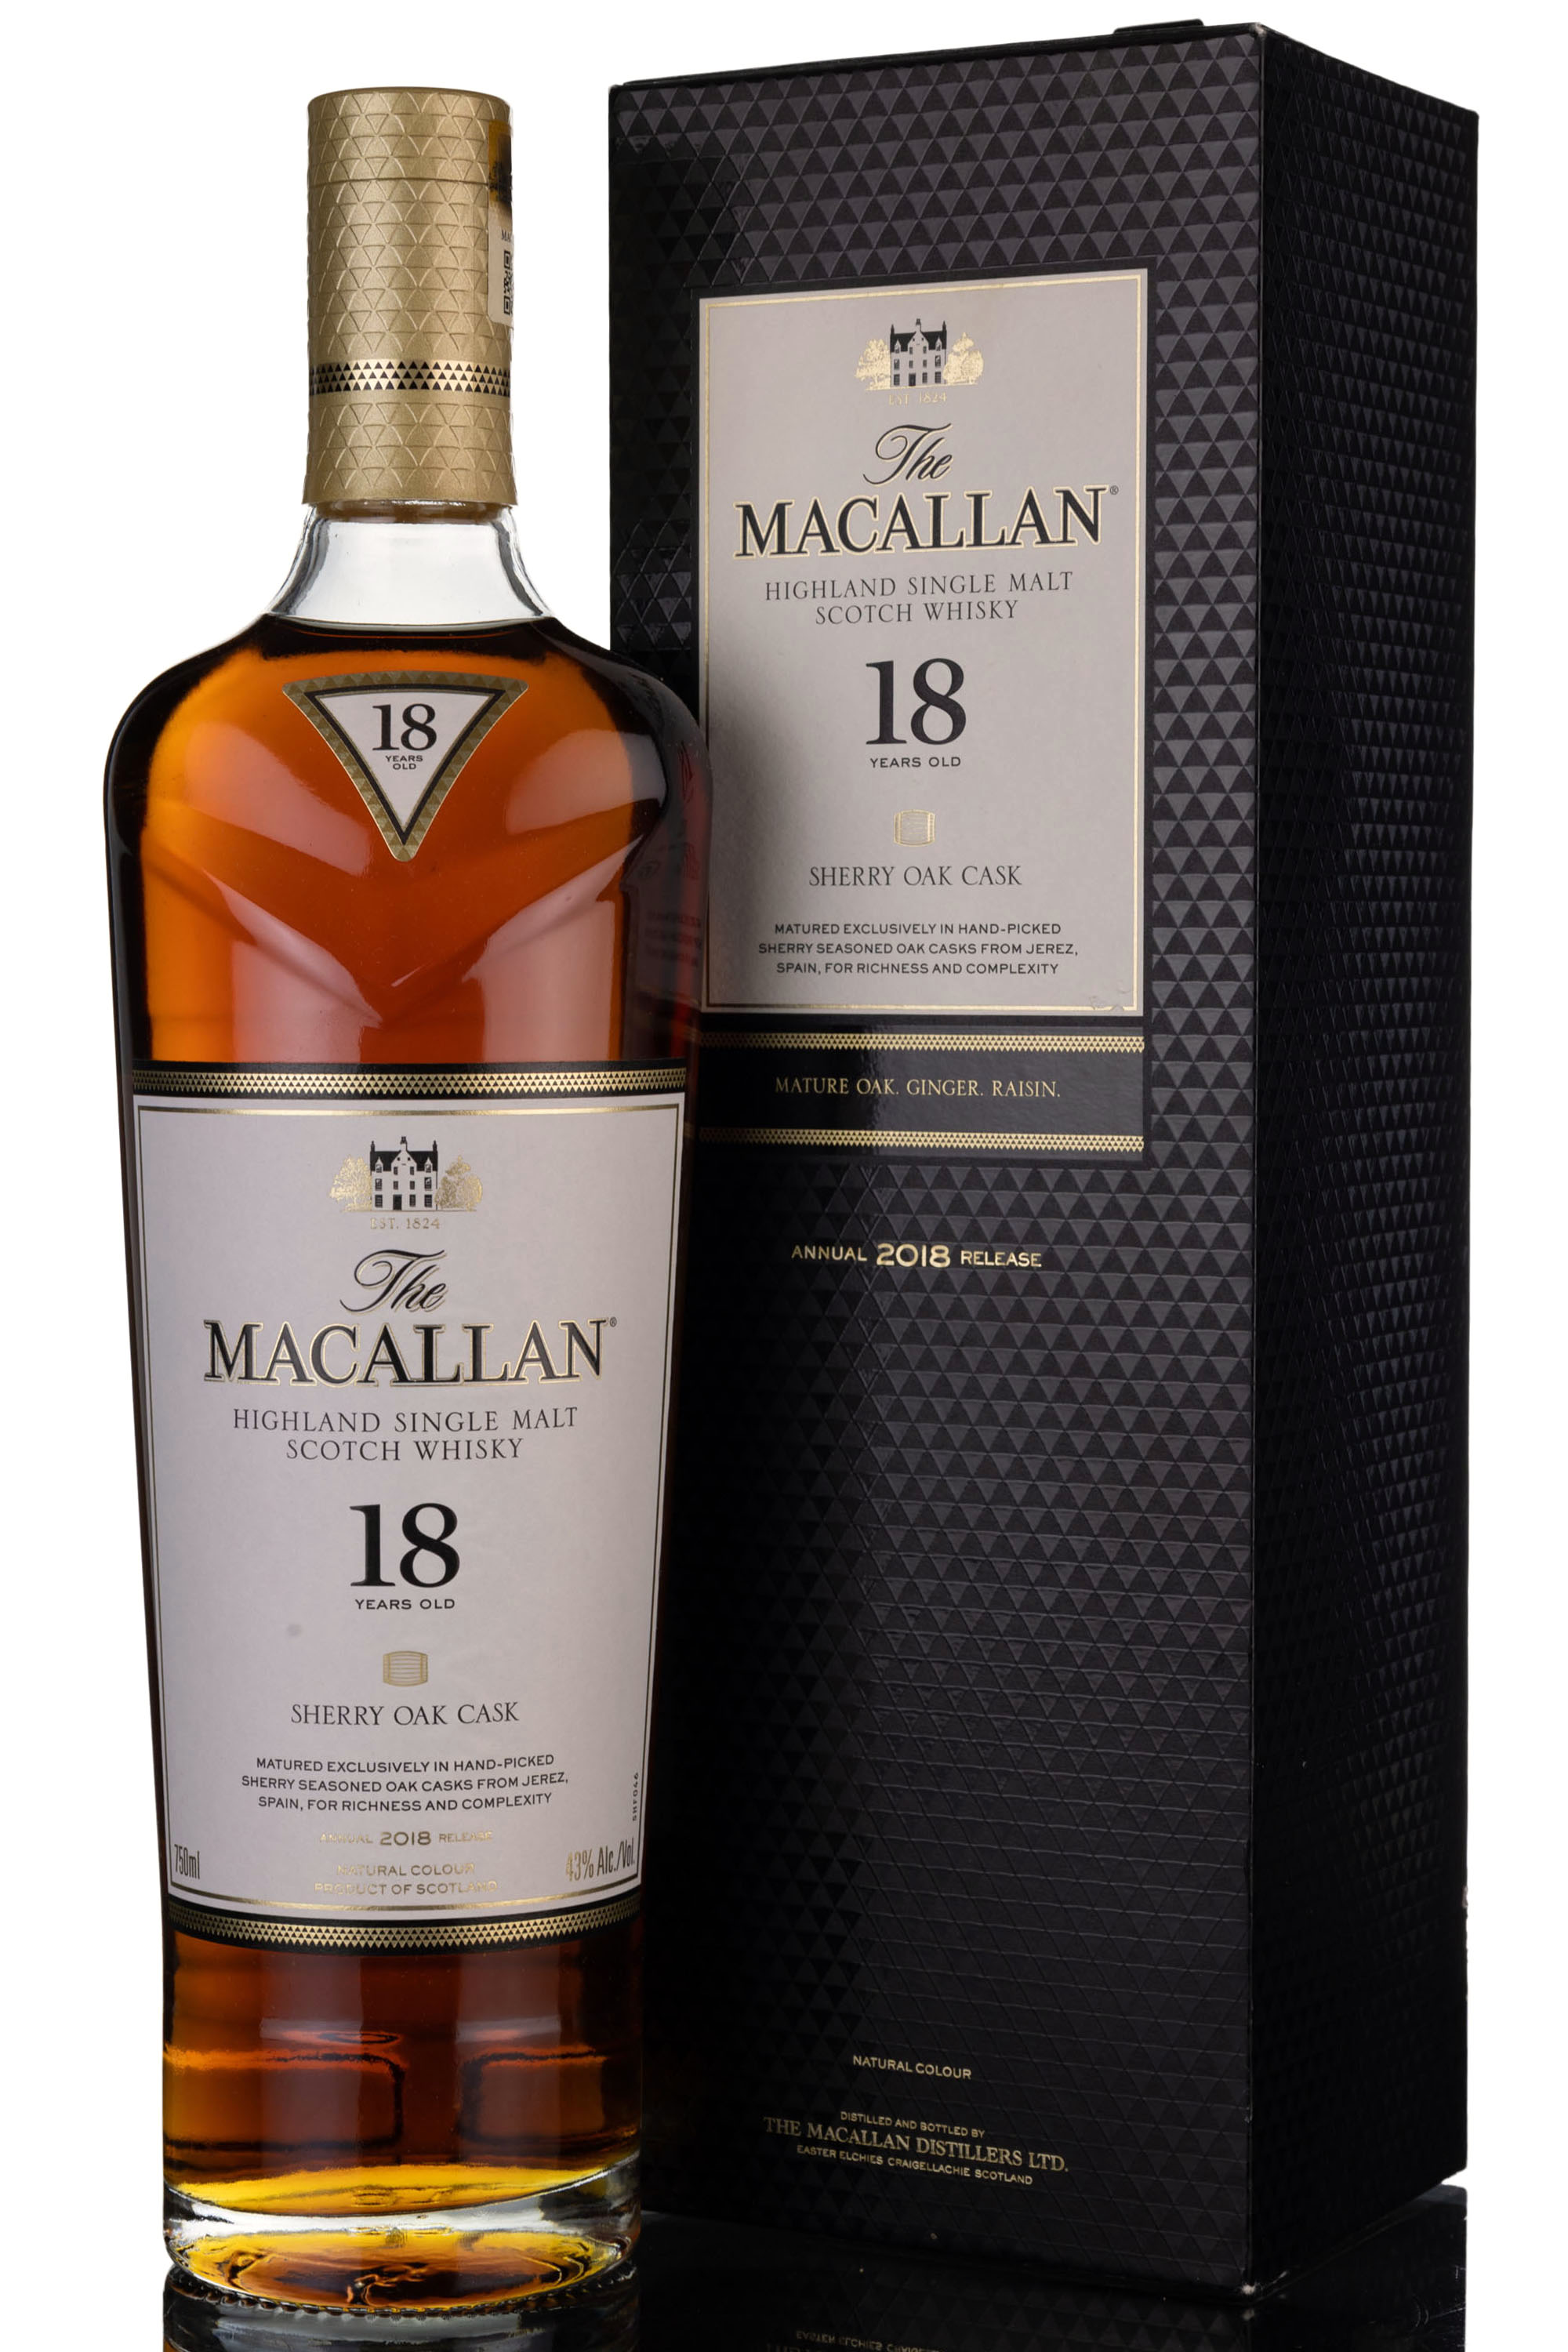 Macallan 18 Year Old - Sherry Cask - 2018 Release